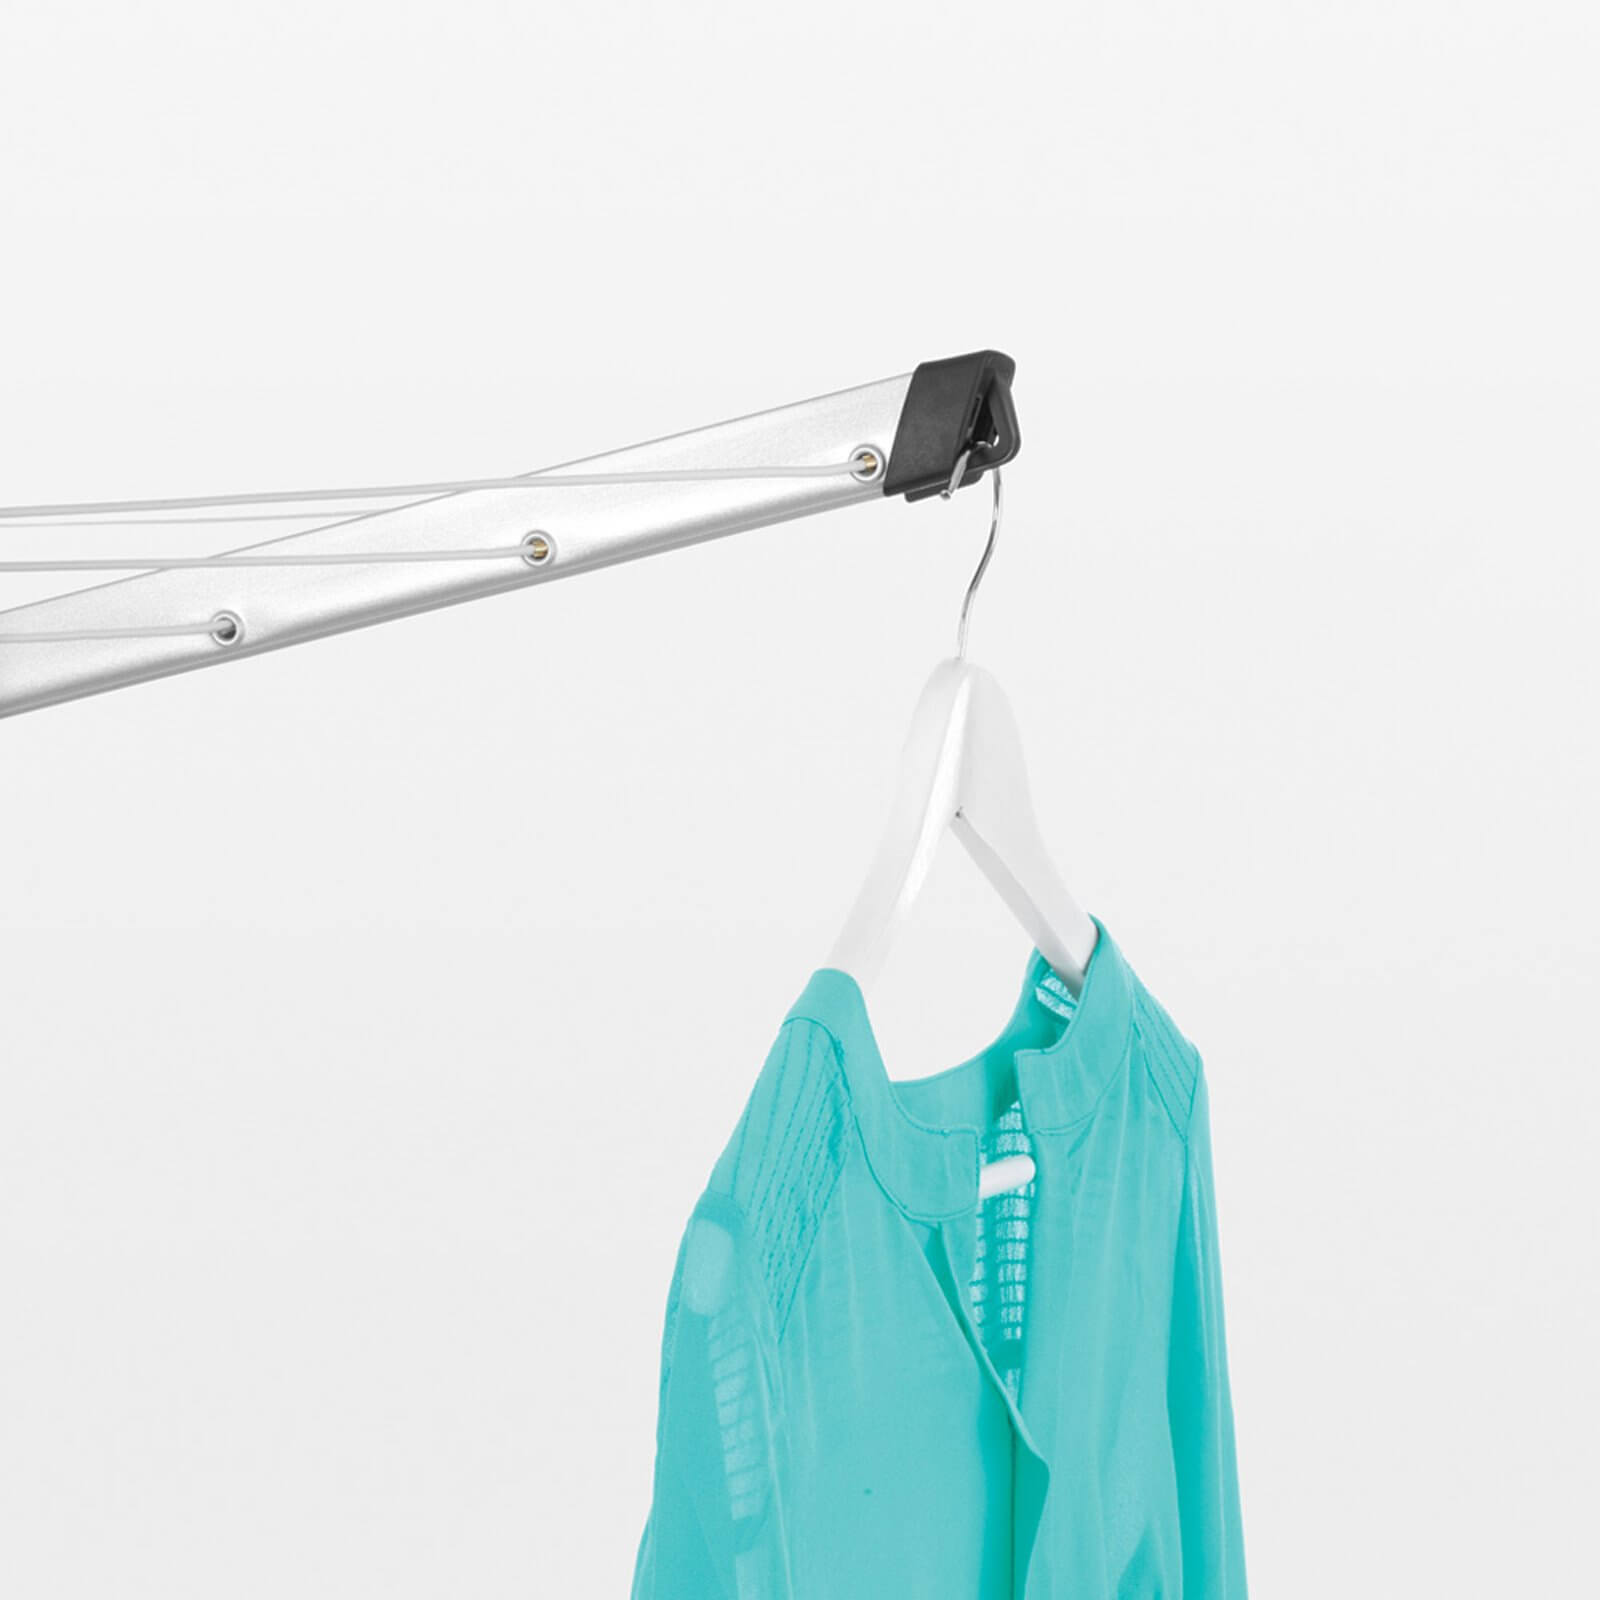 Brabantia Liftomatic Outdoor Rotary Clothes Airer - 60m